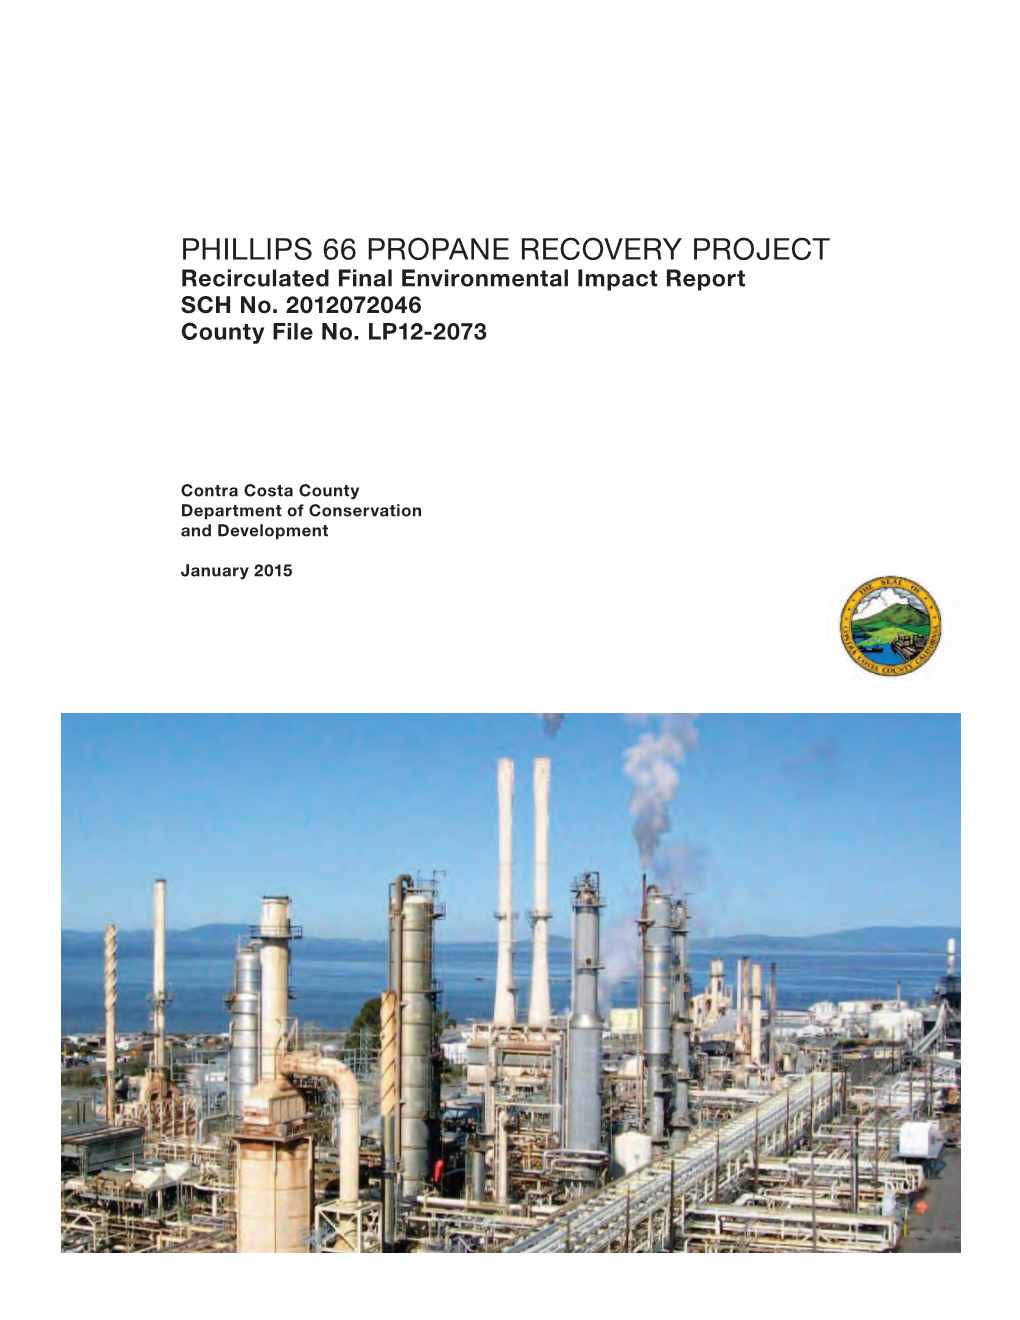 PHILLIPS 66 PROPANE RECOVERY PROJECT Recirculated Final Environmental Impact Report SCH No